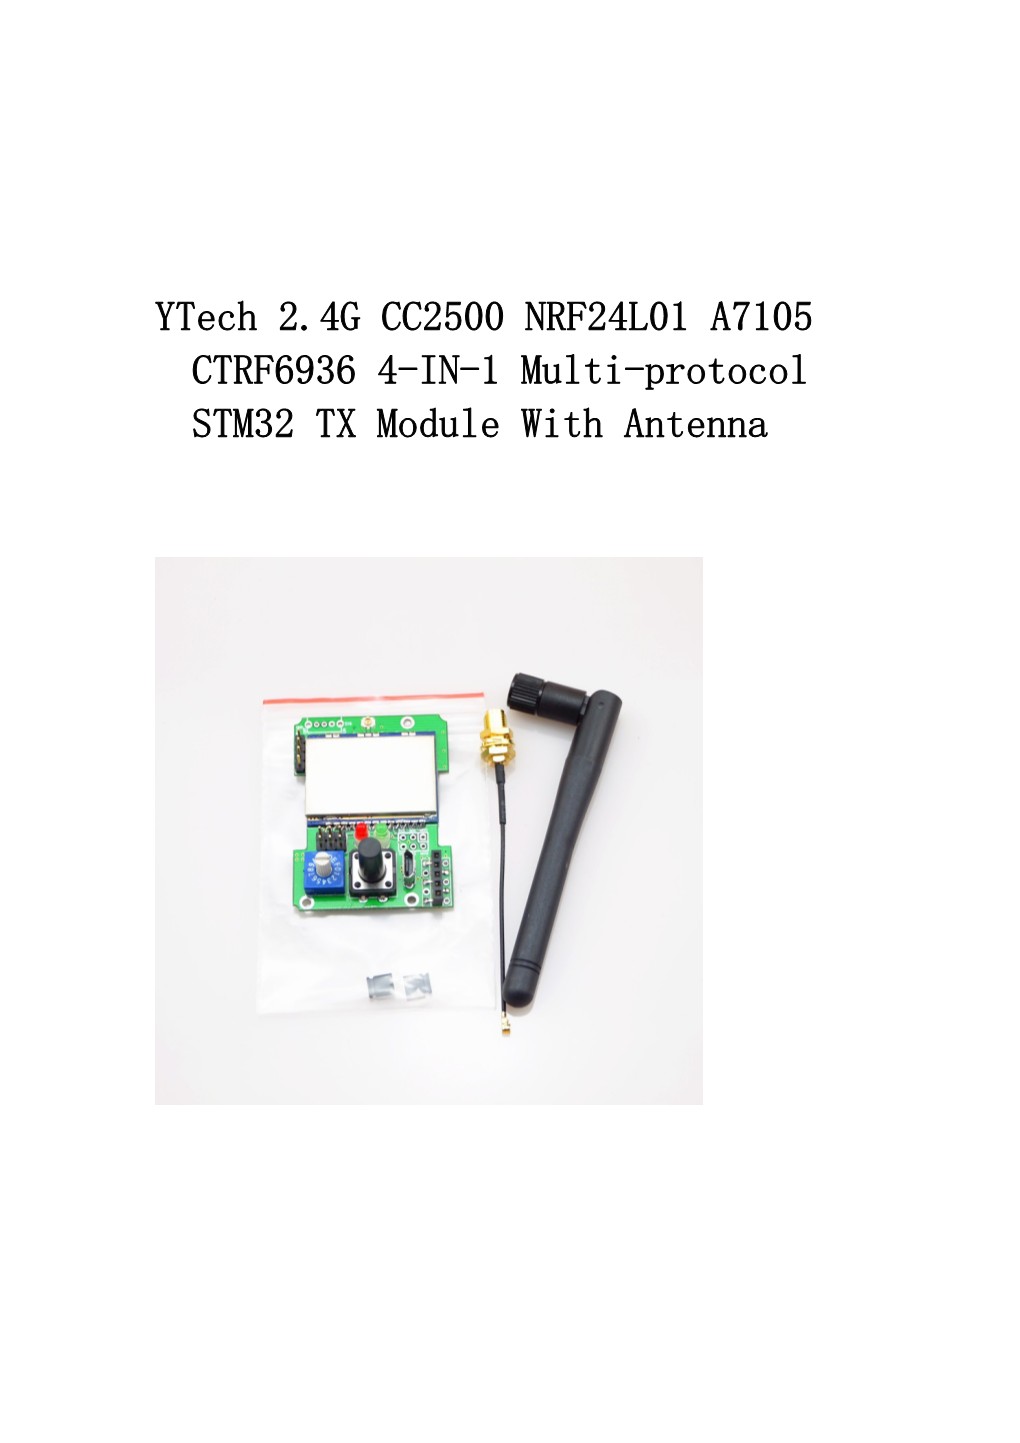 Ytech 2.4G CC2500 NRF24L01 A7105 CTRF6936 4-IN-1 Multi-Protocol STM32 TX Module with Antenna